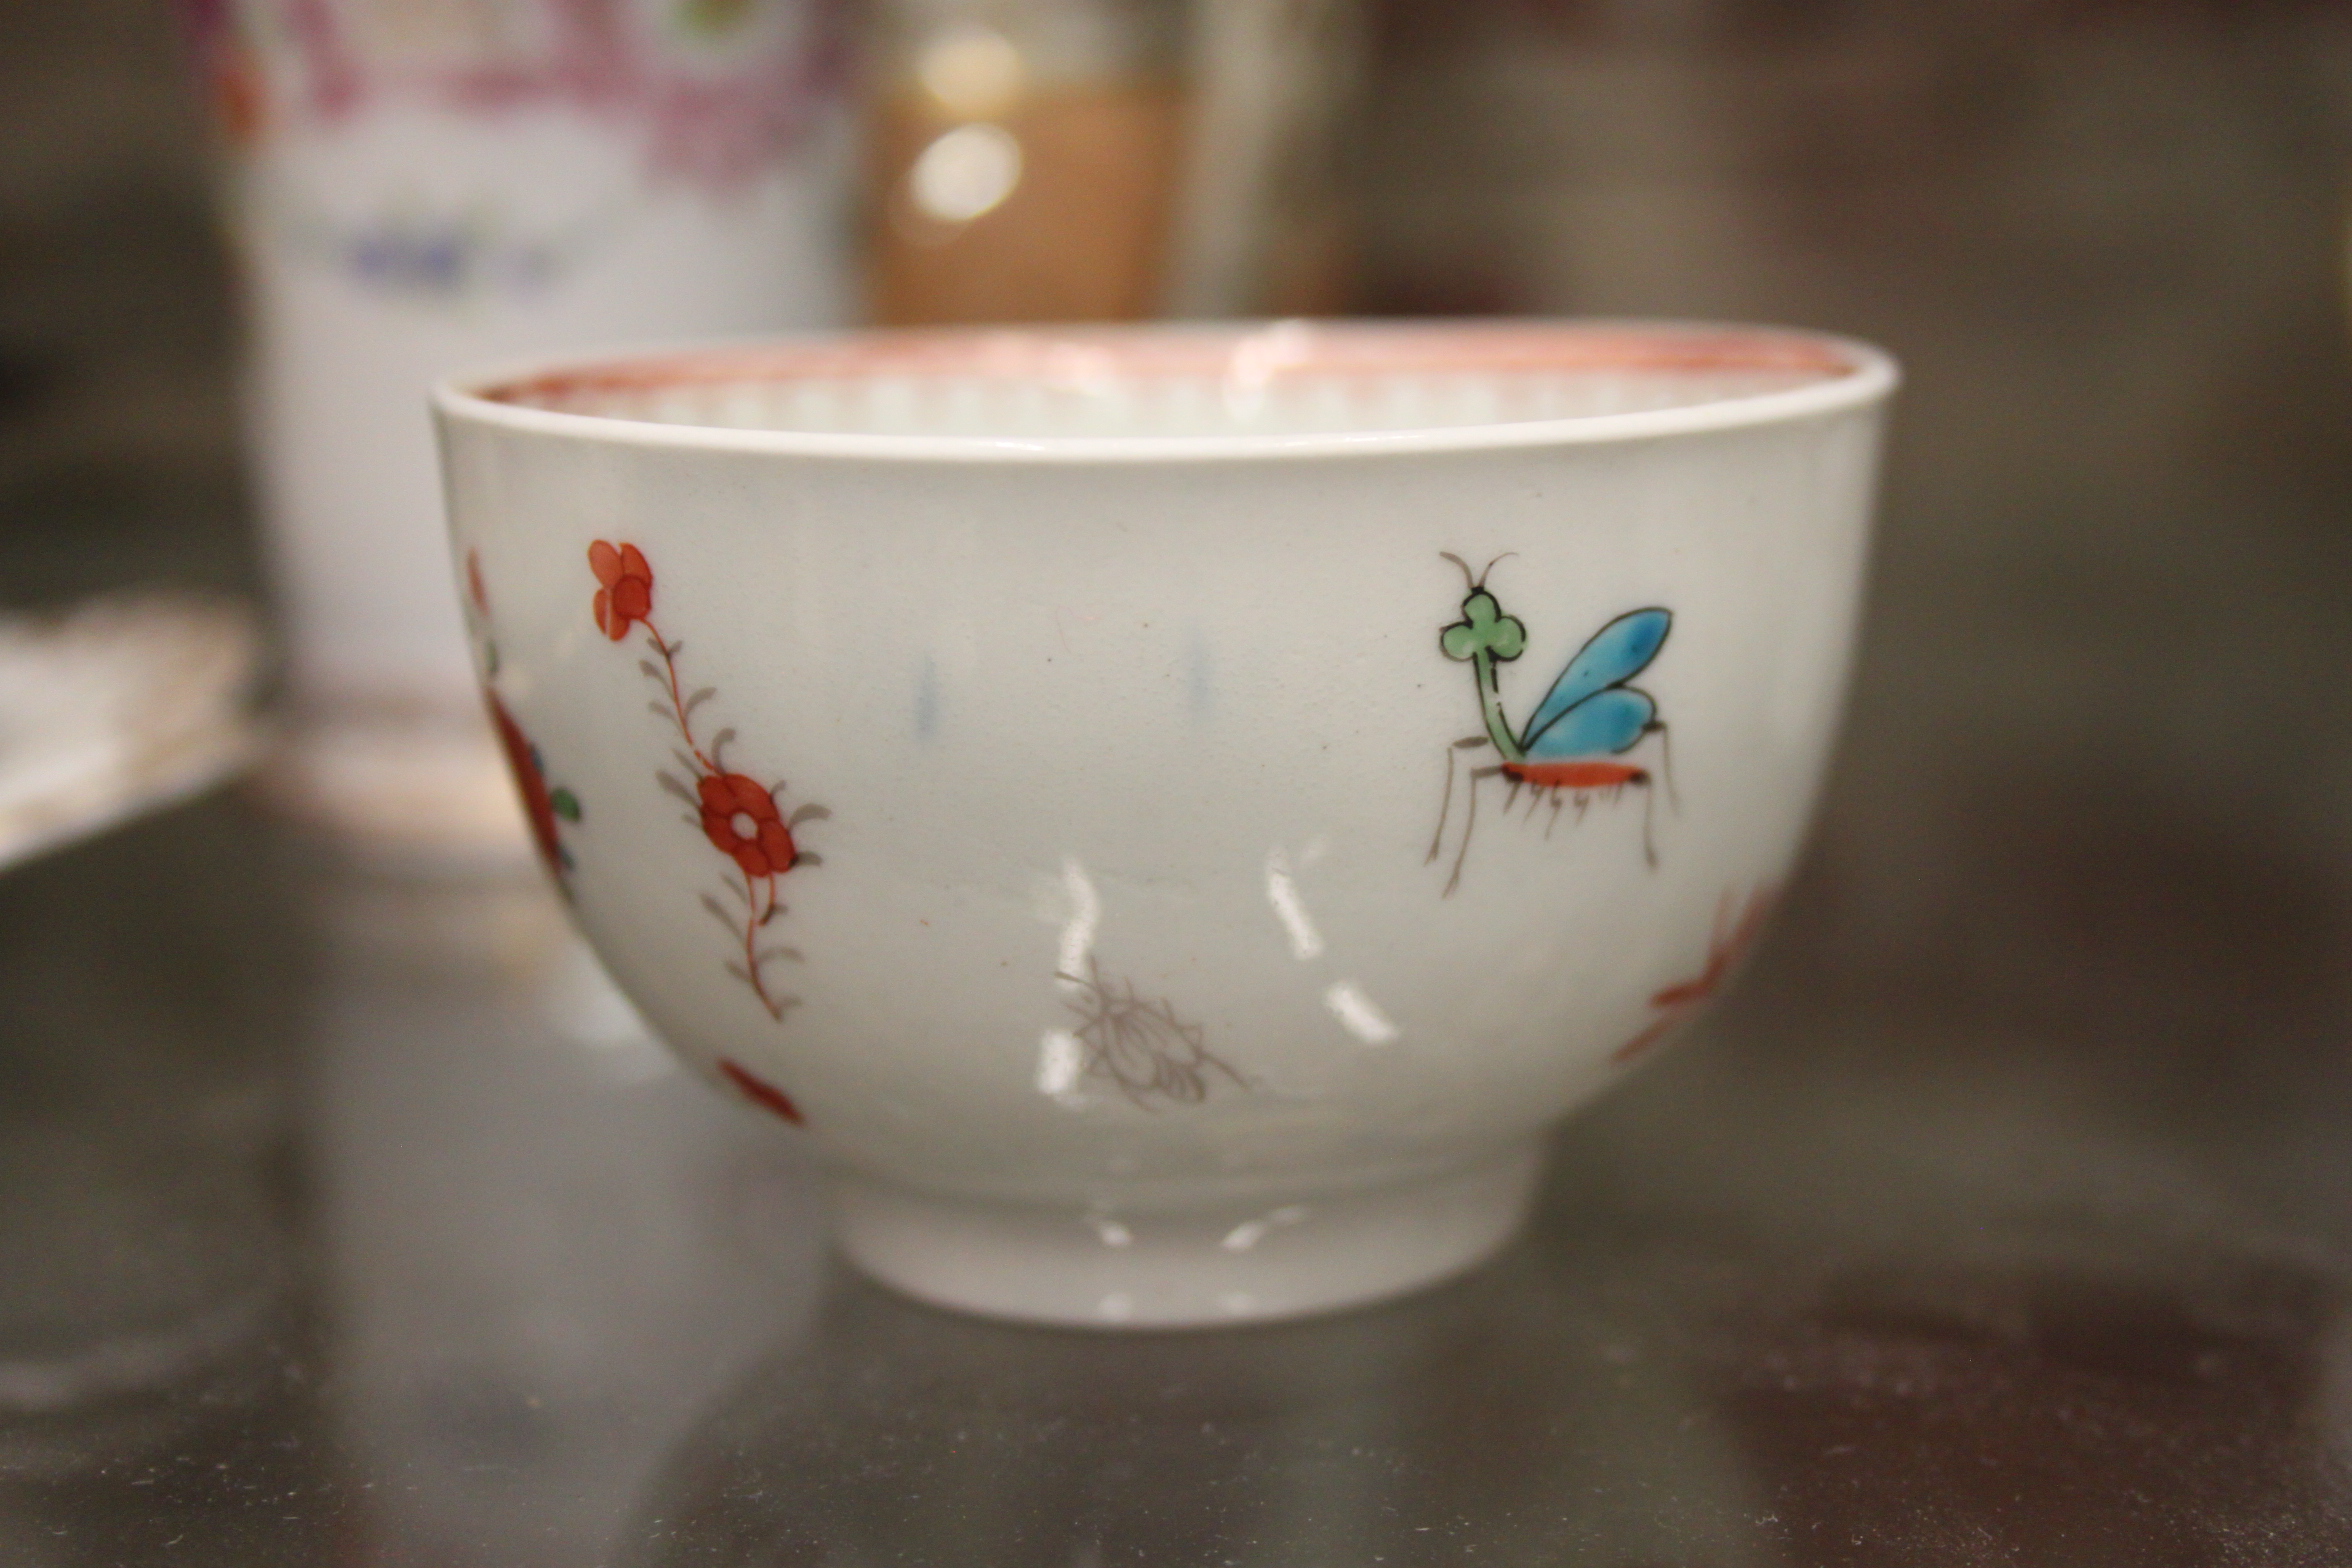 An 18th century English porcelain tea bowl, decorated insects and flowers, a Ridgeway jug with - Image 14 of 29